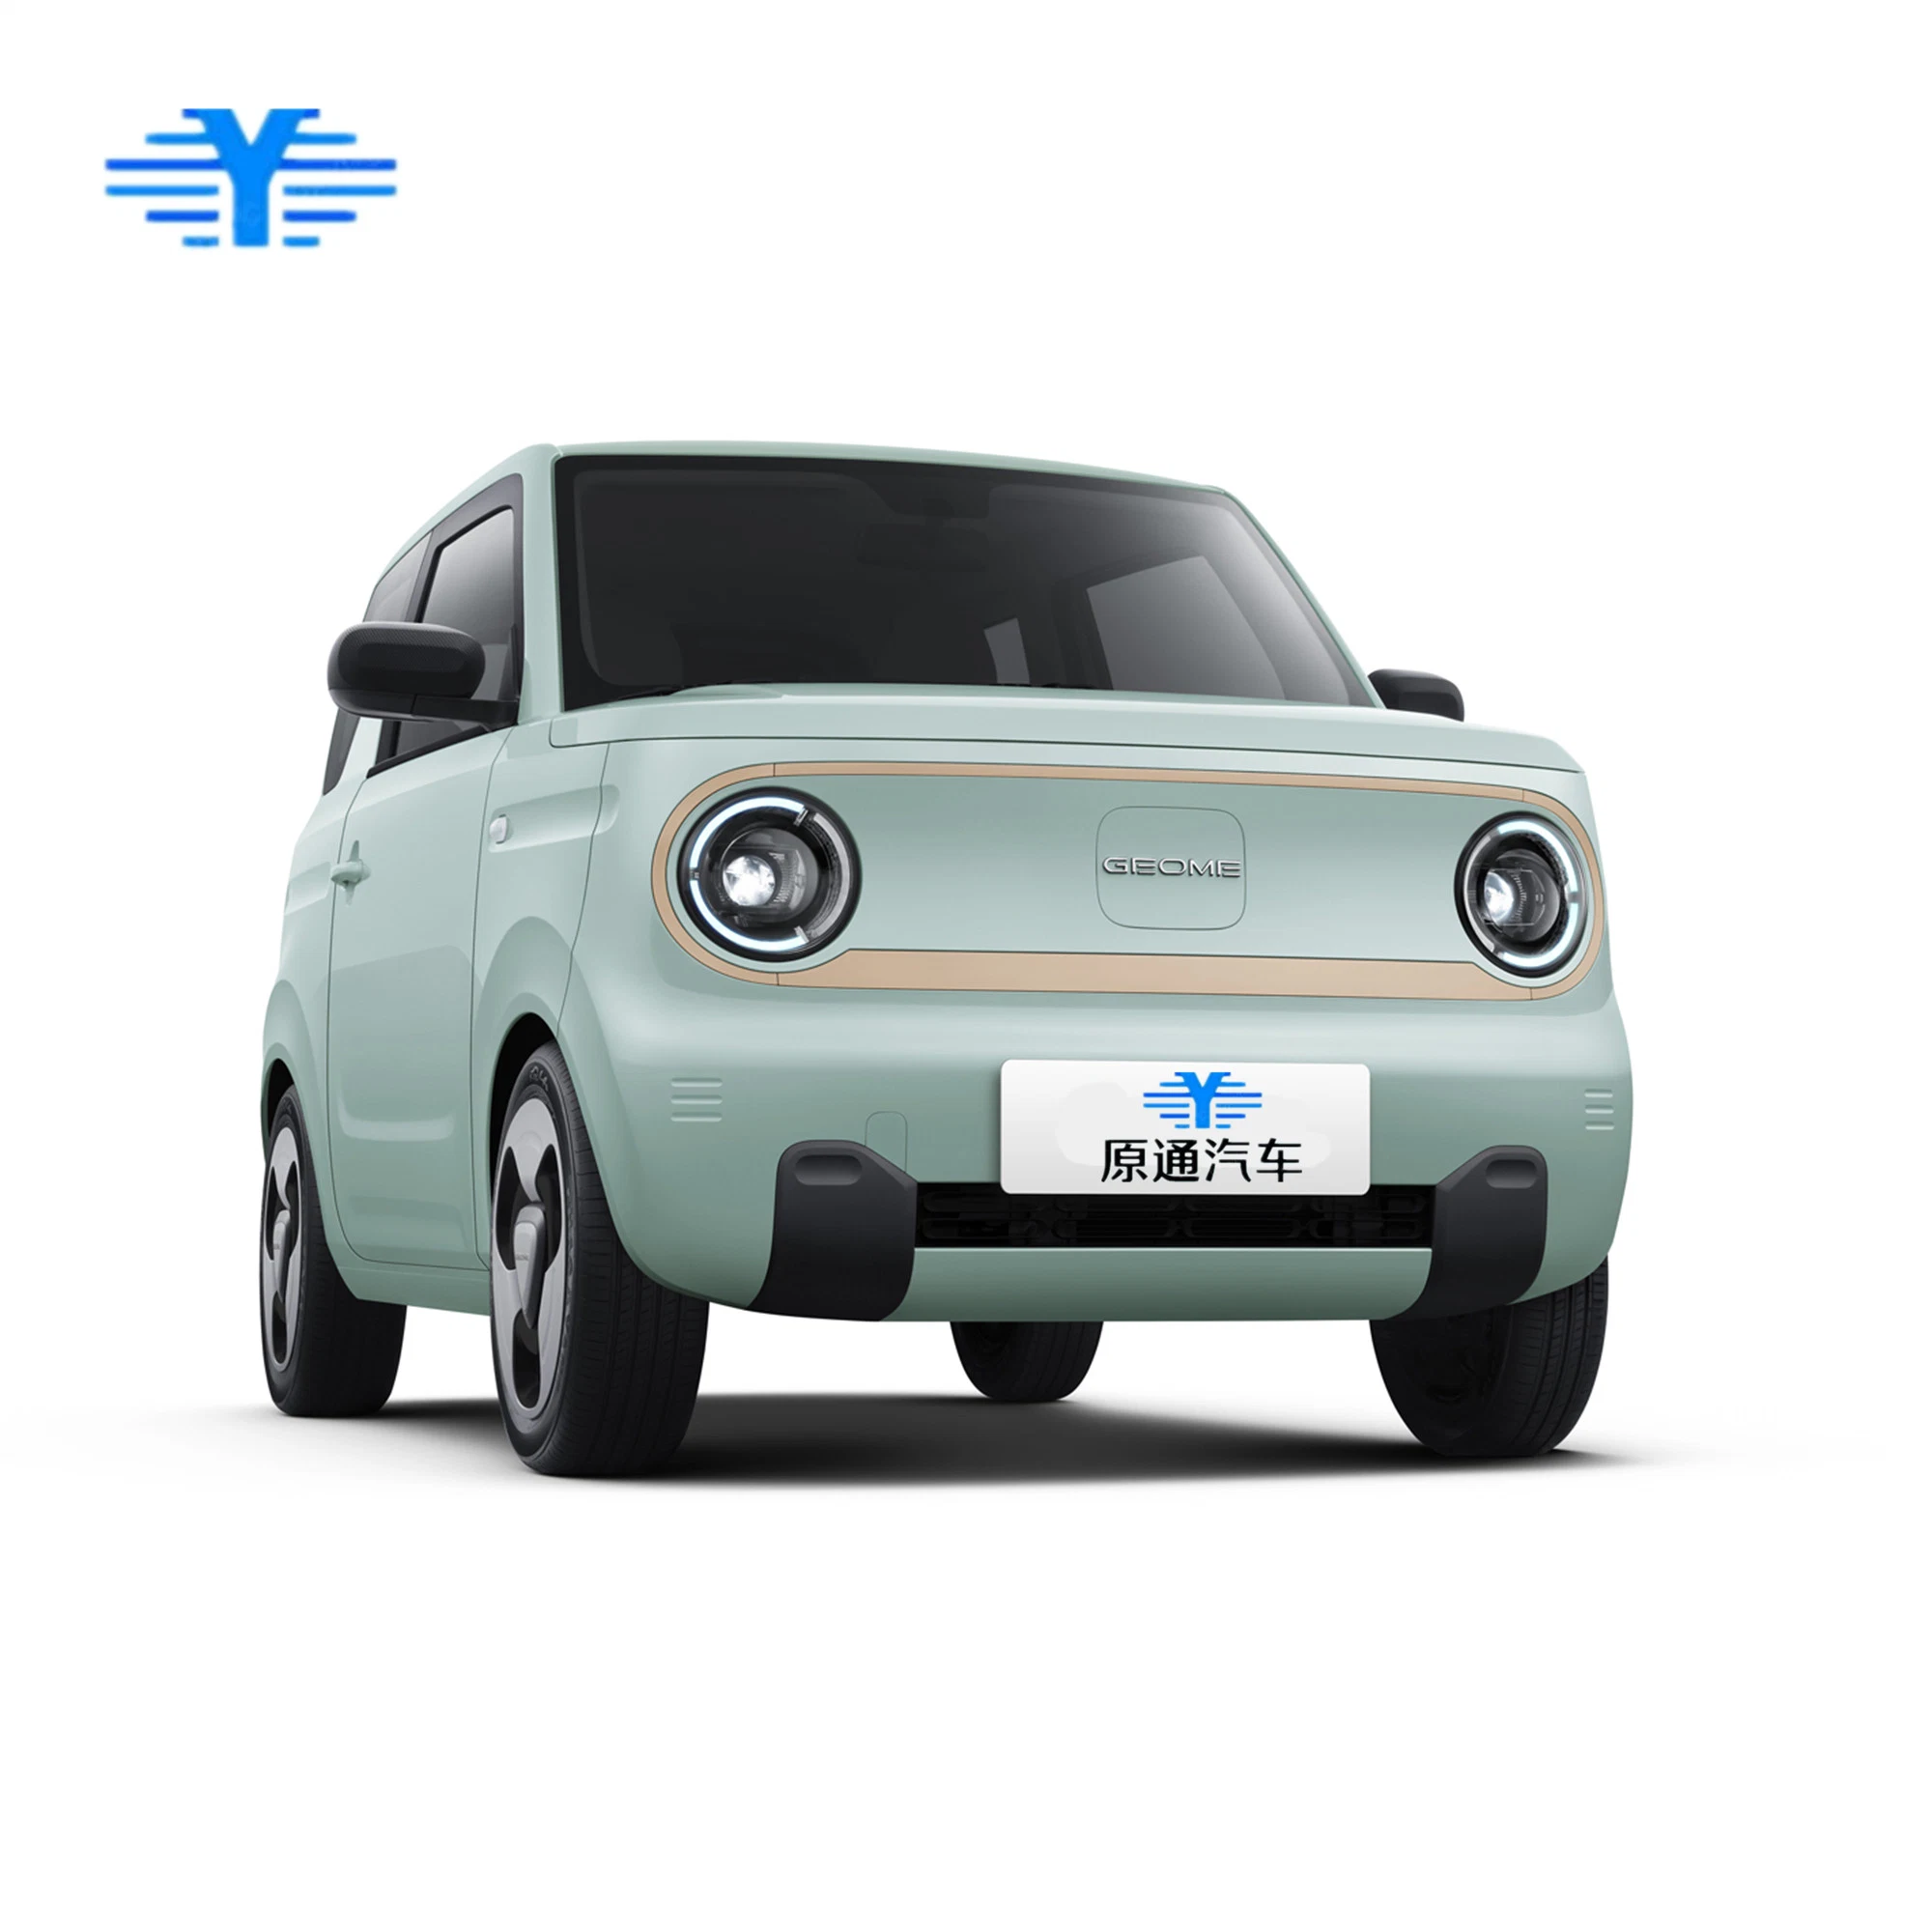 Best Car for Under 5000 Geely Panda Mini EV Car Small Electric Vehicle Very Cute and Harmless Super Value Special Offer